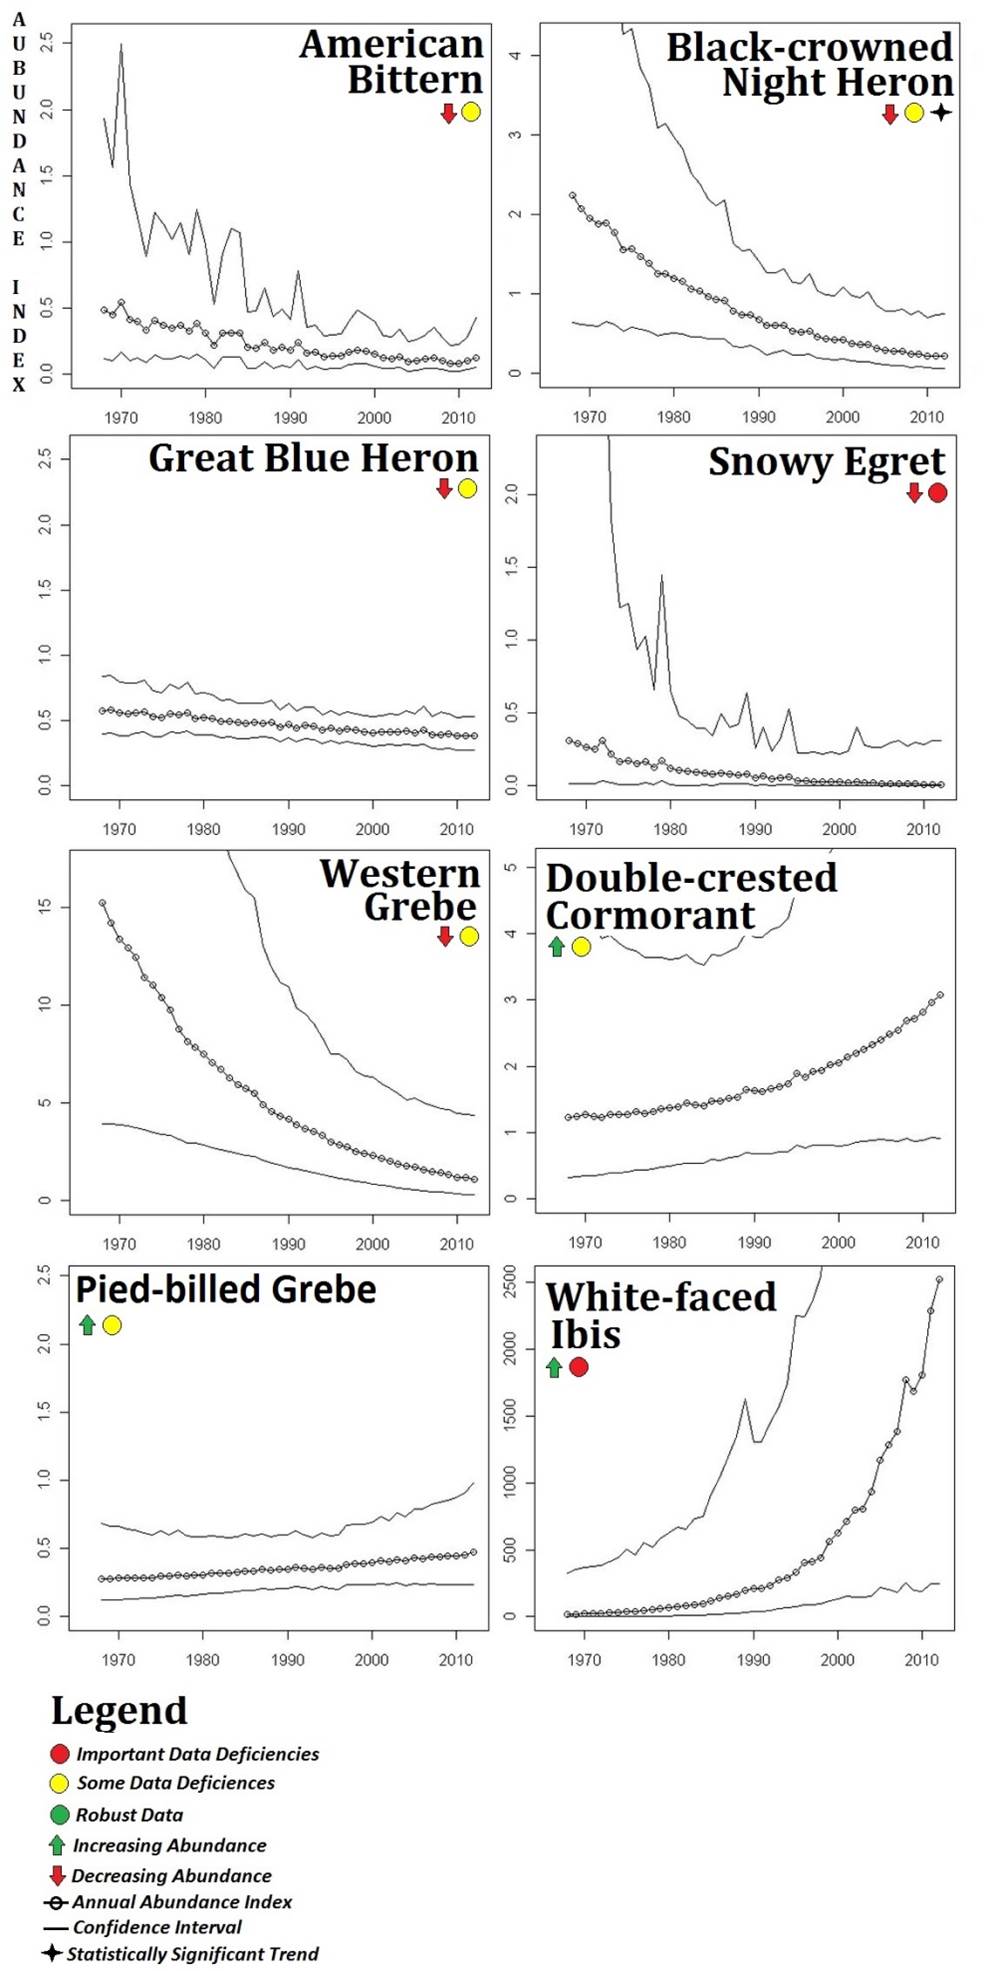 Figure 16. North American Breeding Bird Survey (BBS) data for statewide abundance trends (1966-2012).The BBS data show eight wading bird species exhibiting clear trends over time. The black-crowned night heron (Nycticorax nycticorax) has shown a statistically significant decline. No species has shown a statistically significant abundance increase. Data: USGS 2014